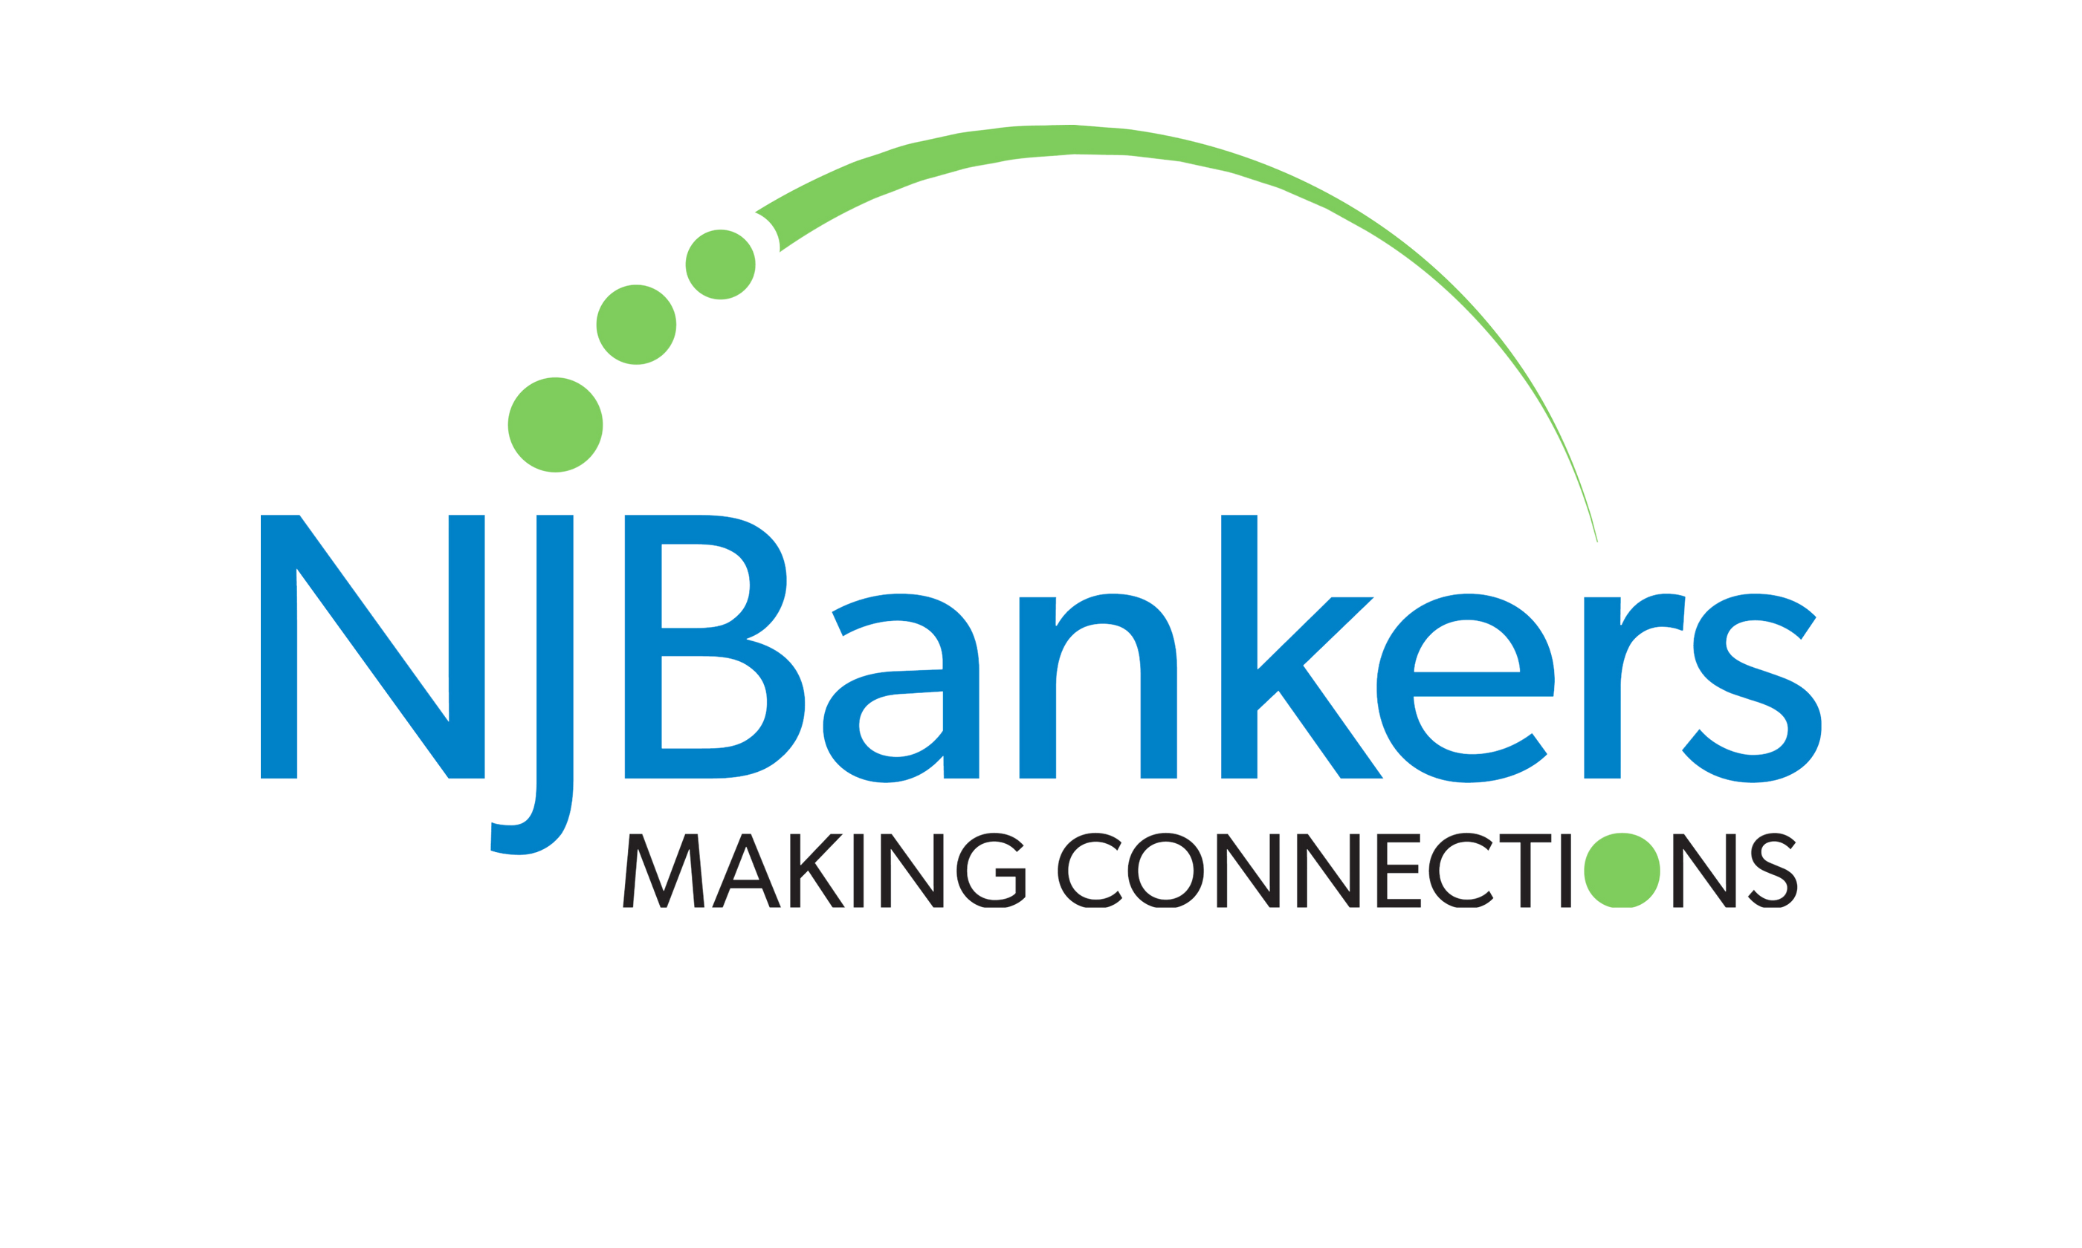 New Jersey Bankers Association